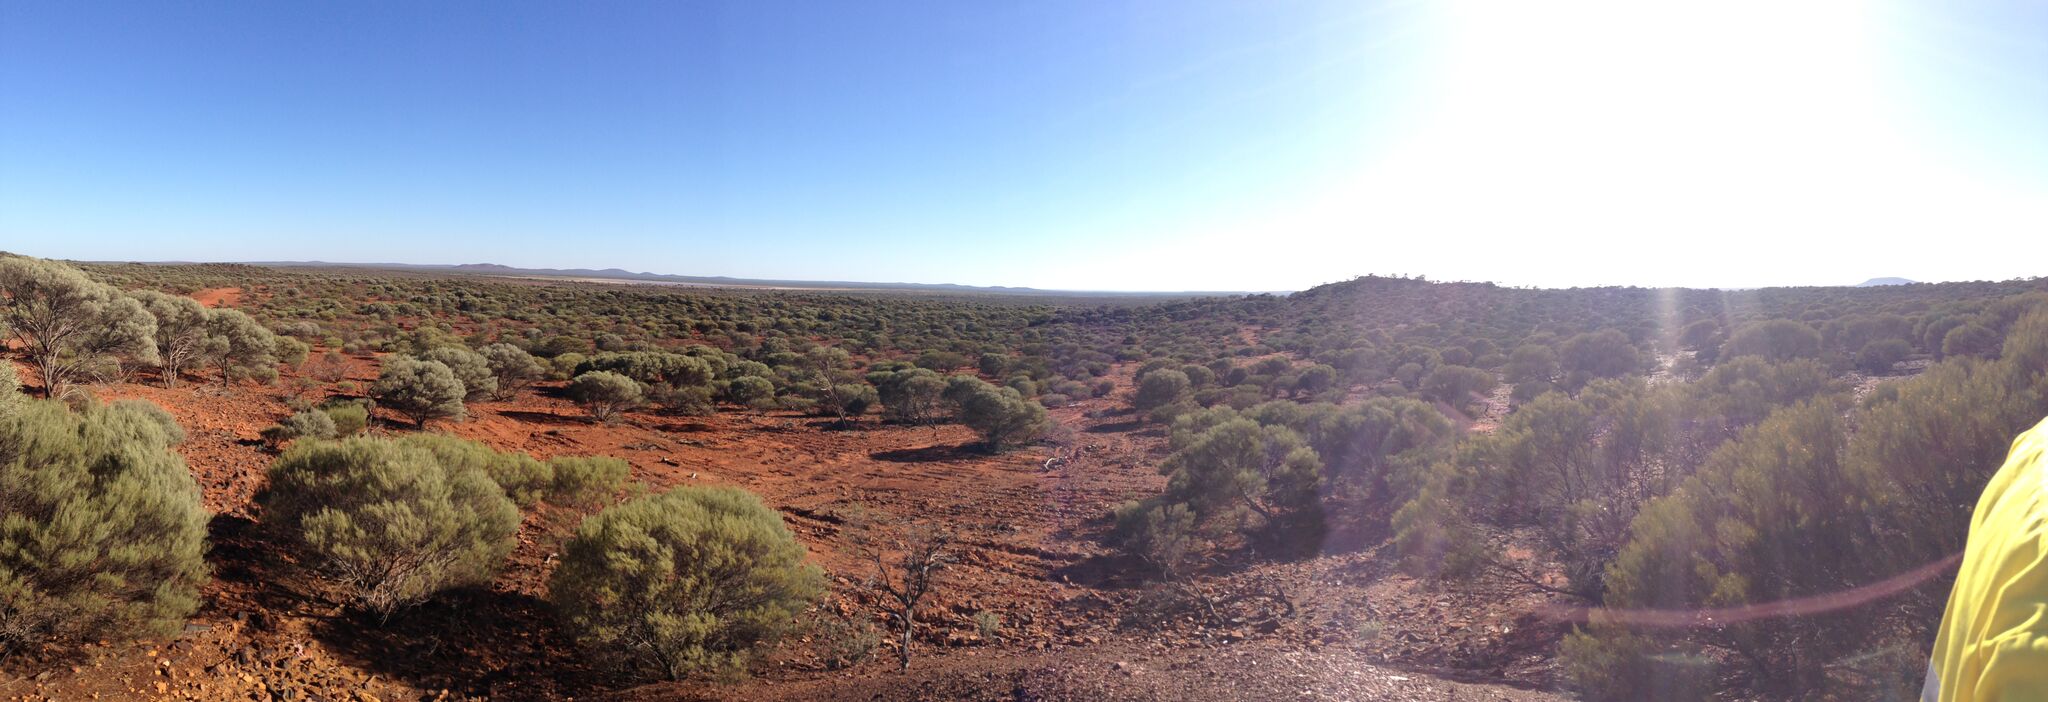 Outback WA with red dirt and low shrubs